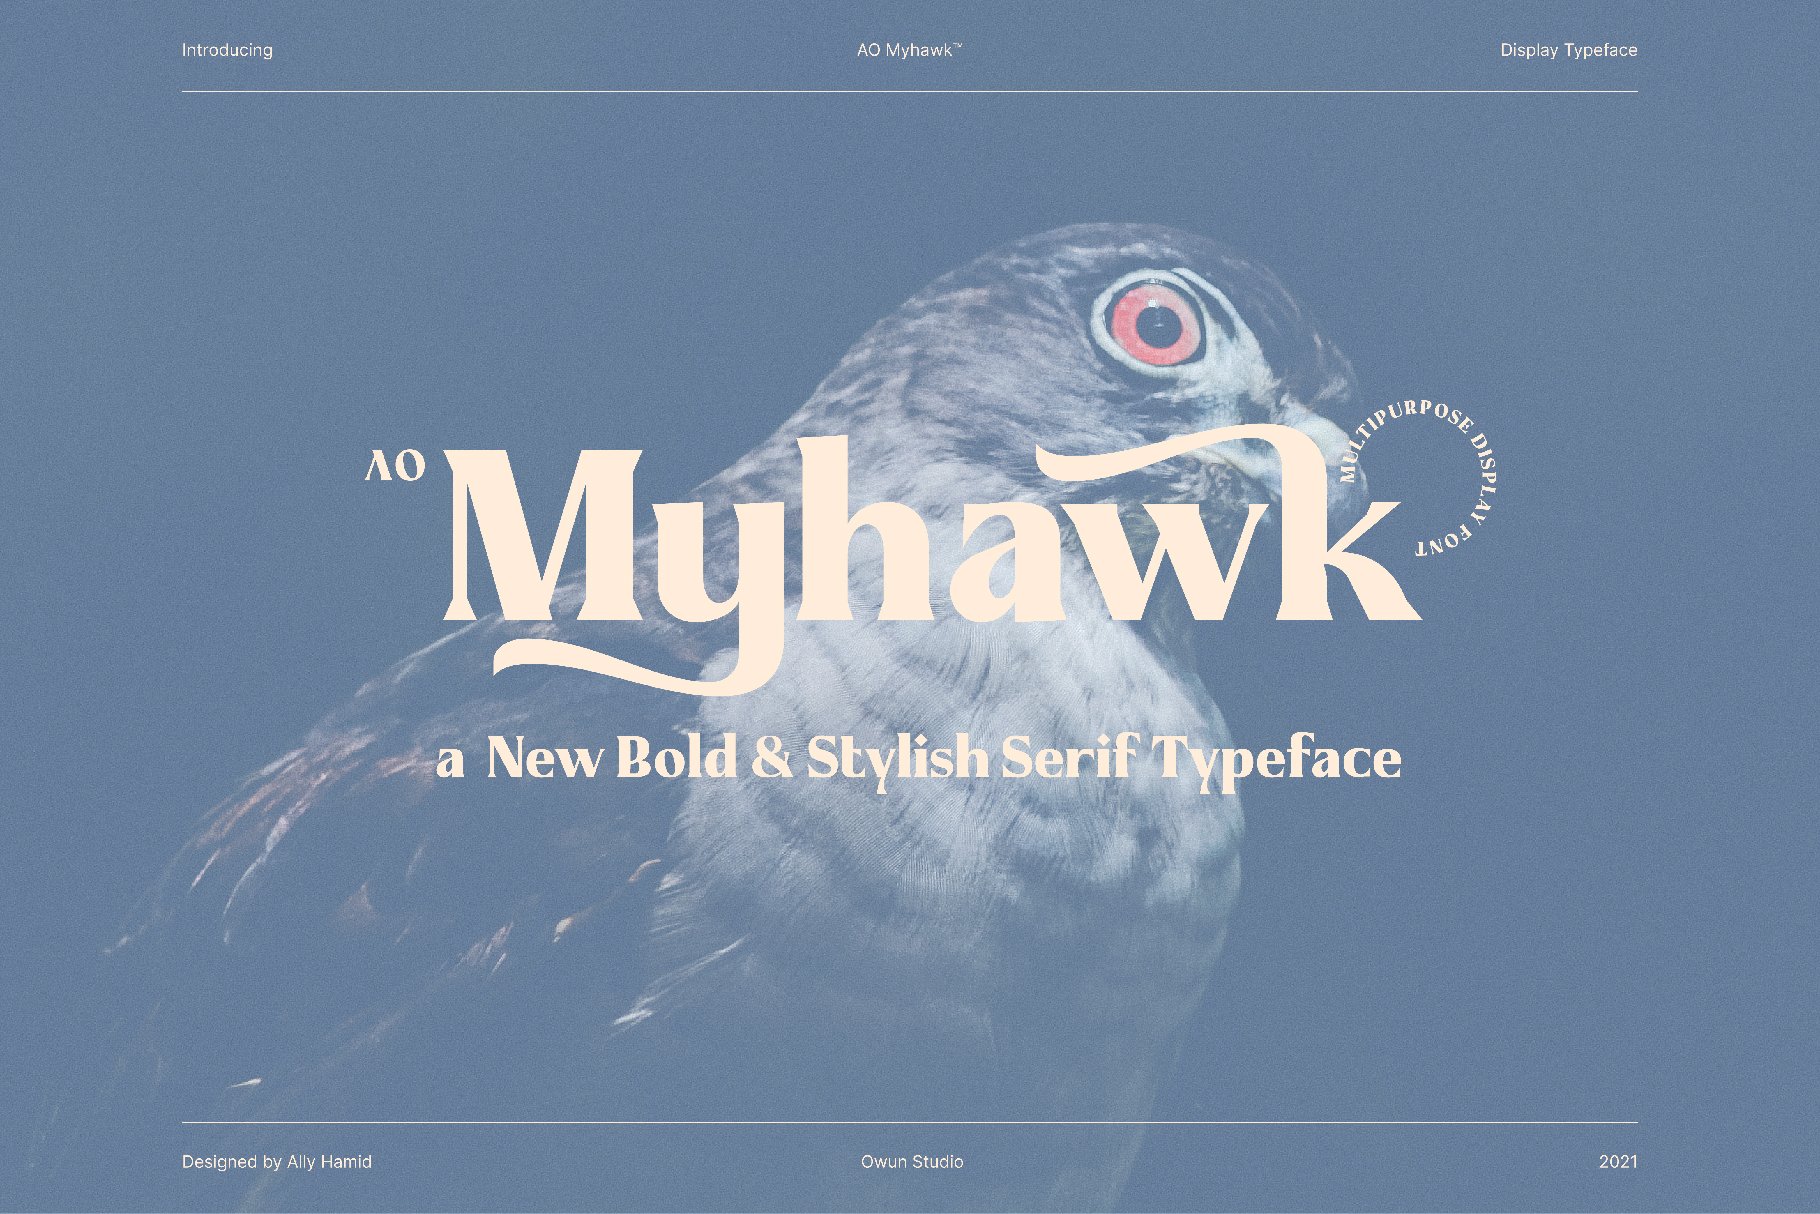 AO Myhawk - Display Typeface cover image.